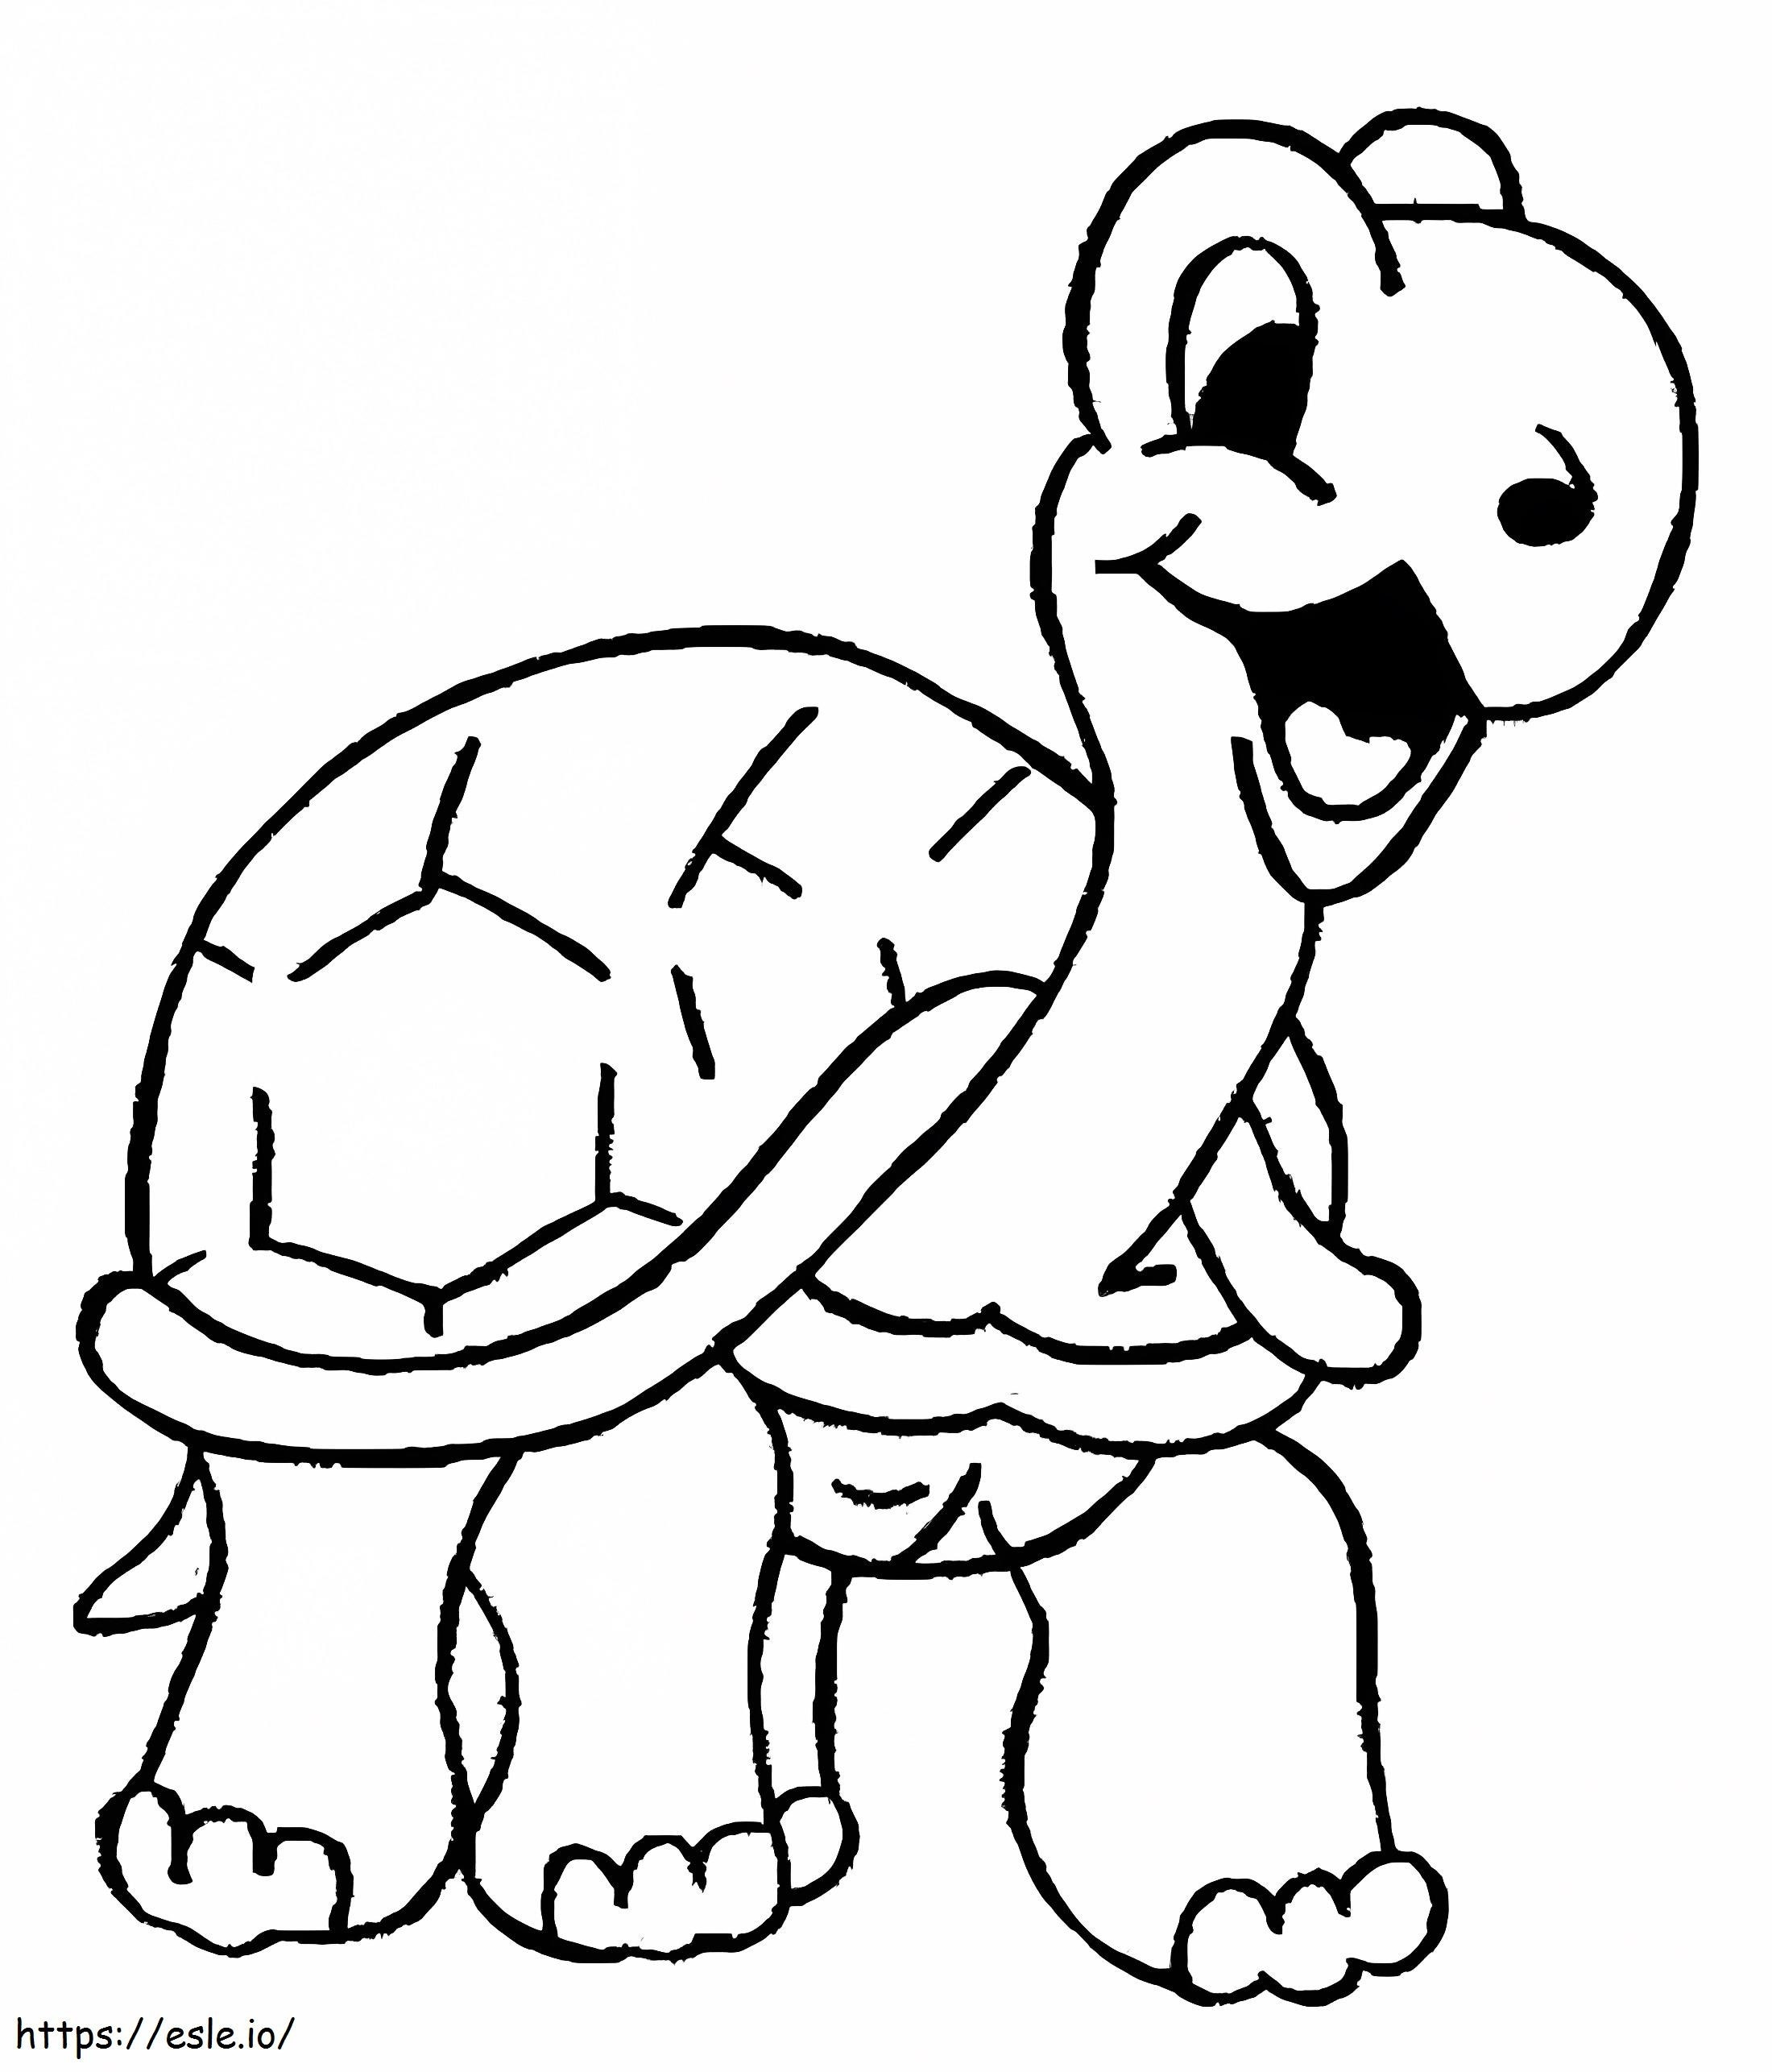 Painted Turtle 21 coloring page